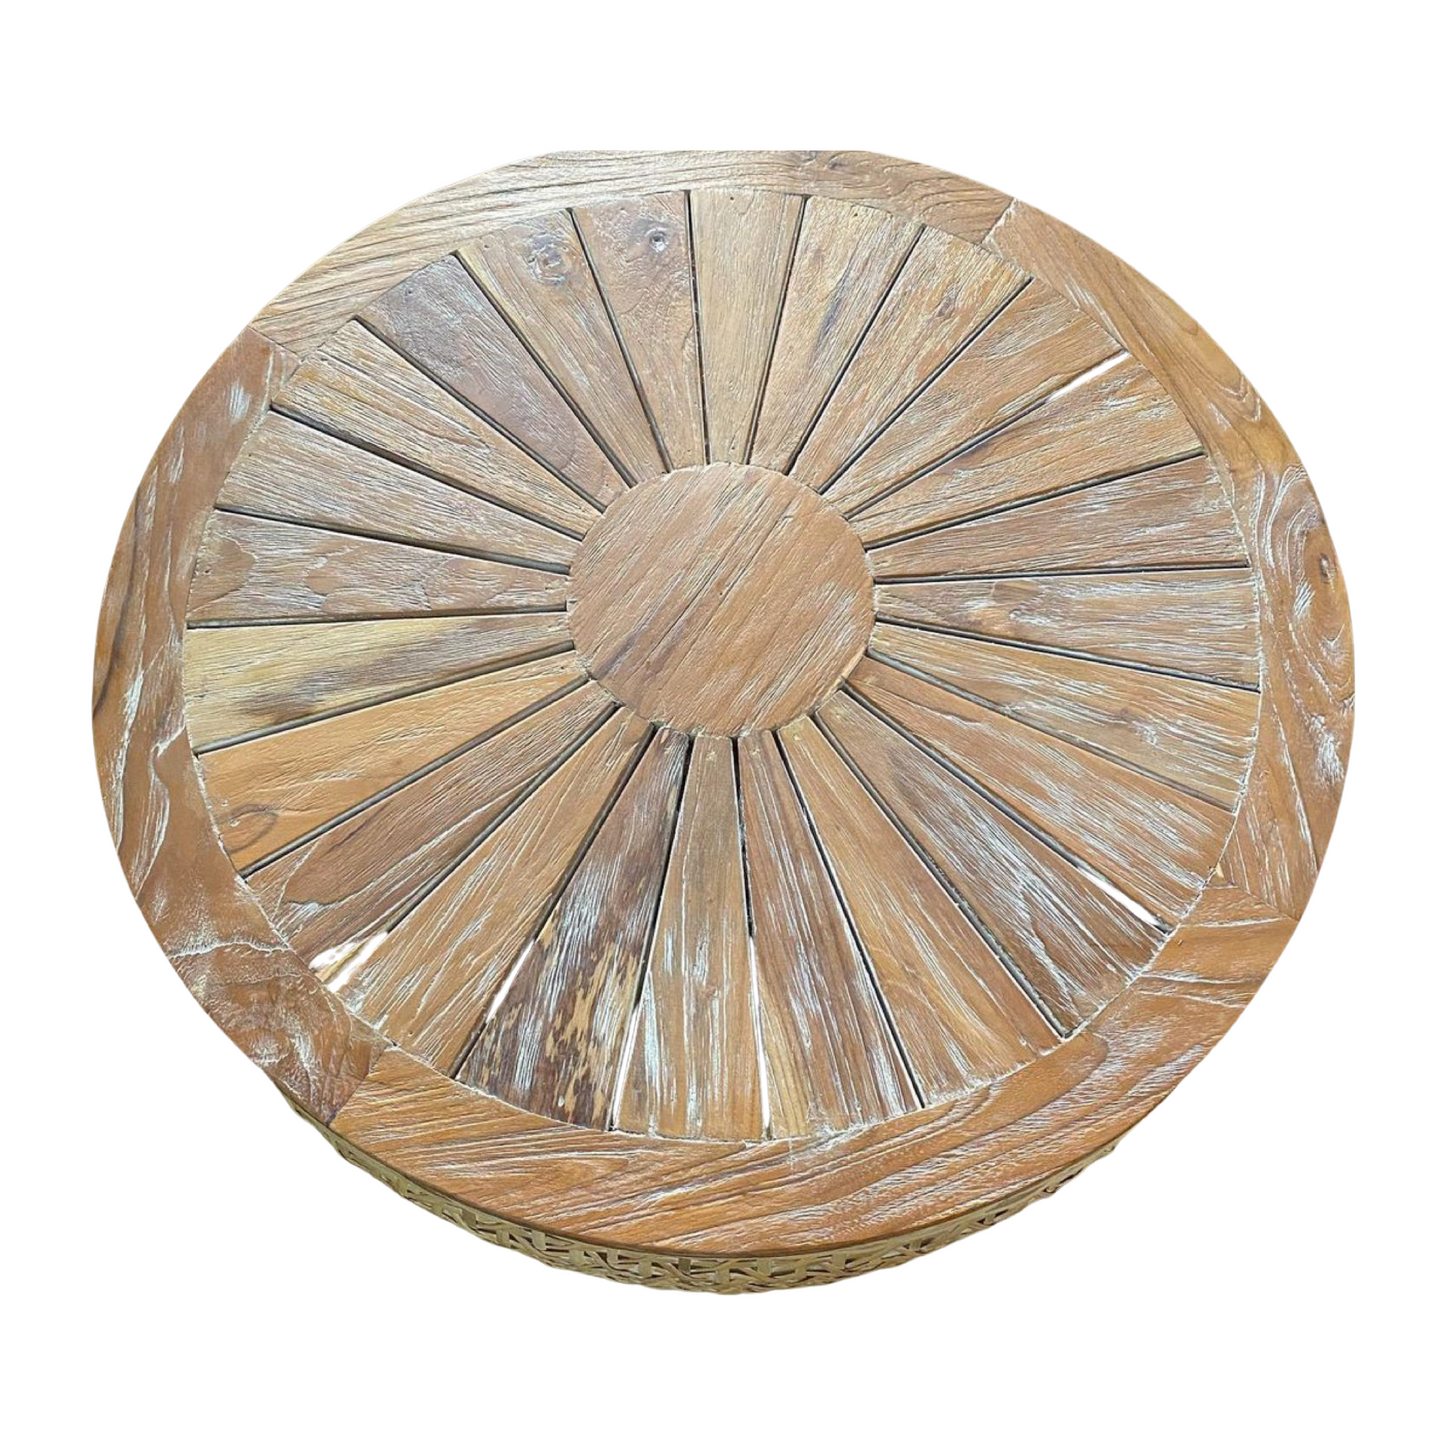 rattan and wooden round coffee table natural wash bali design hand carved hand made decorative house furniture wood material decorative wall panels decorative wood panels decorative panel board